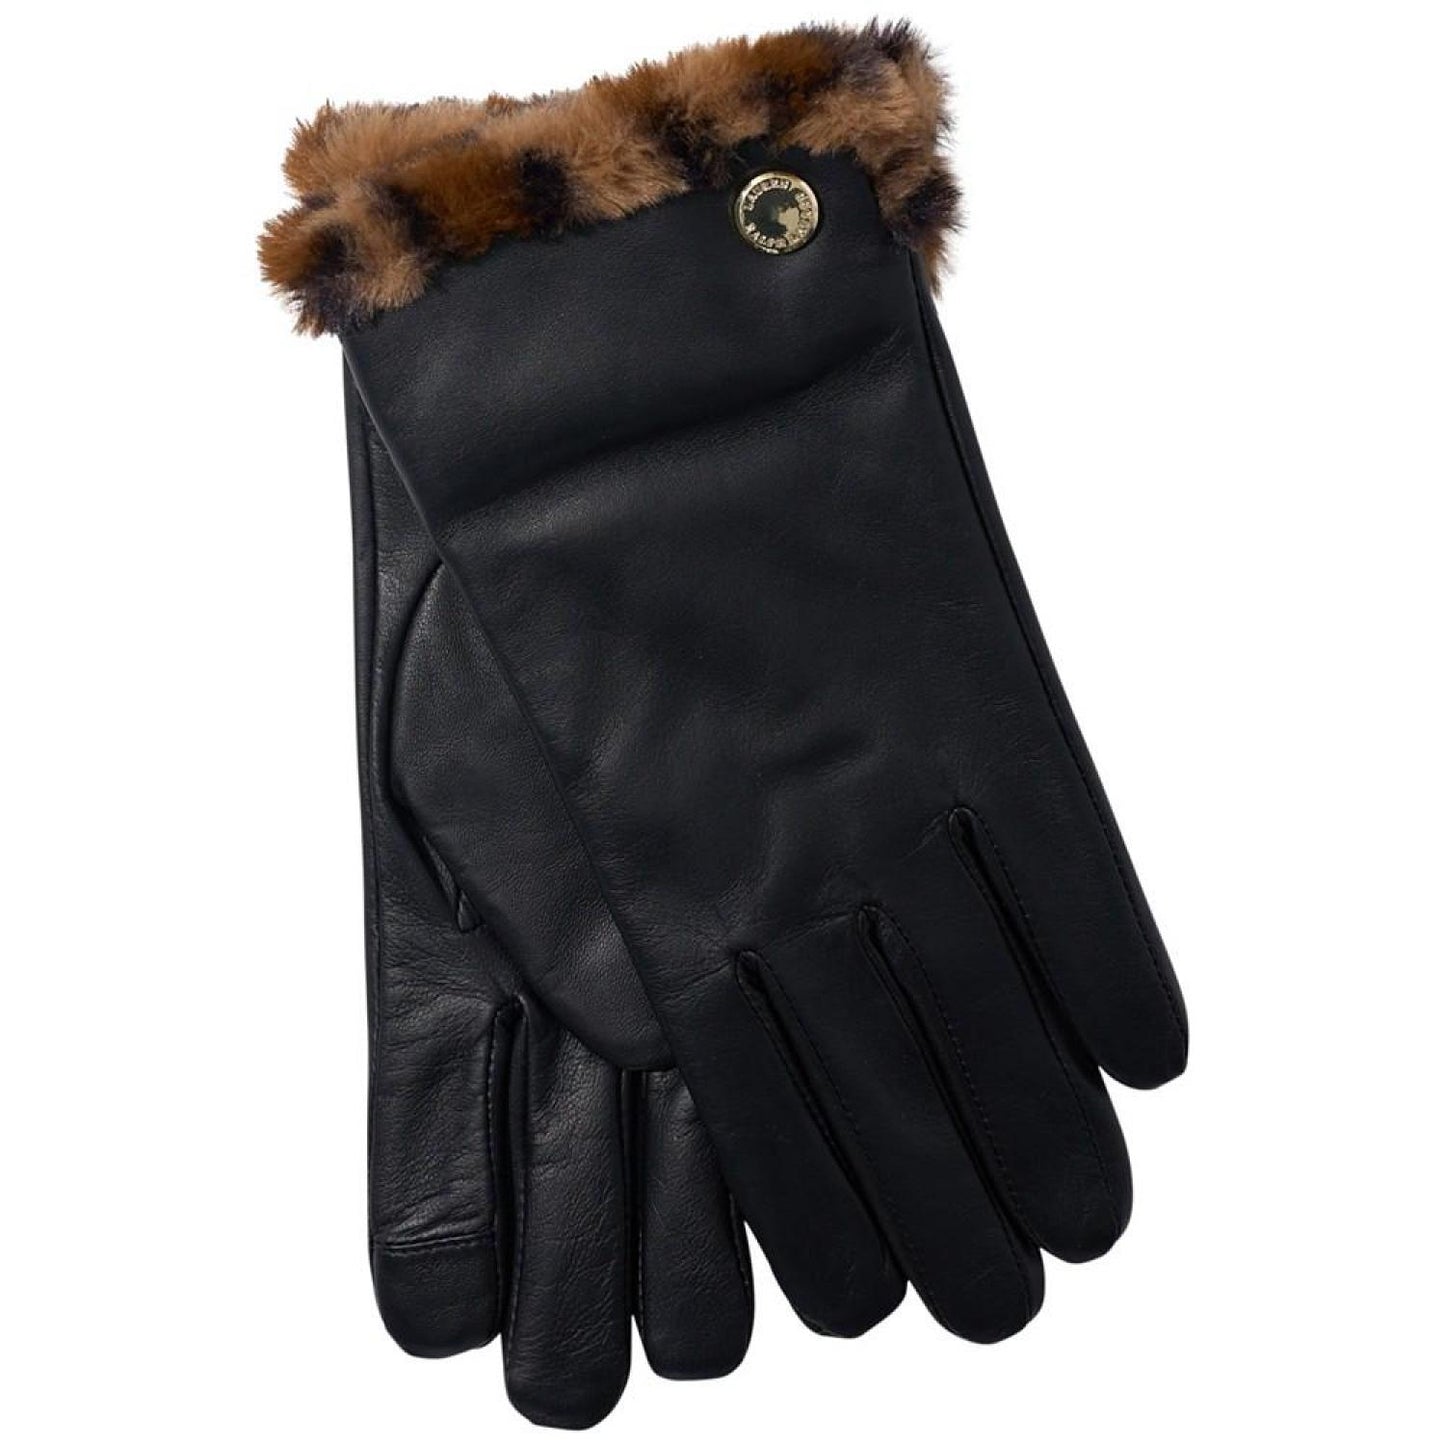 Women's Plush Lined Leather Gloves